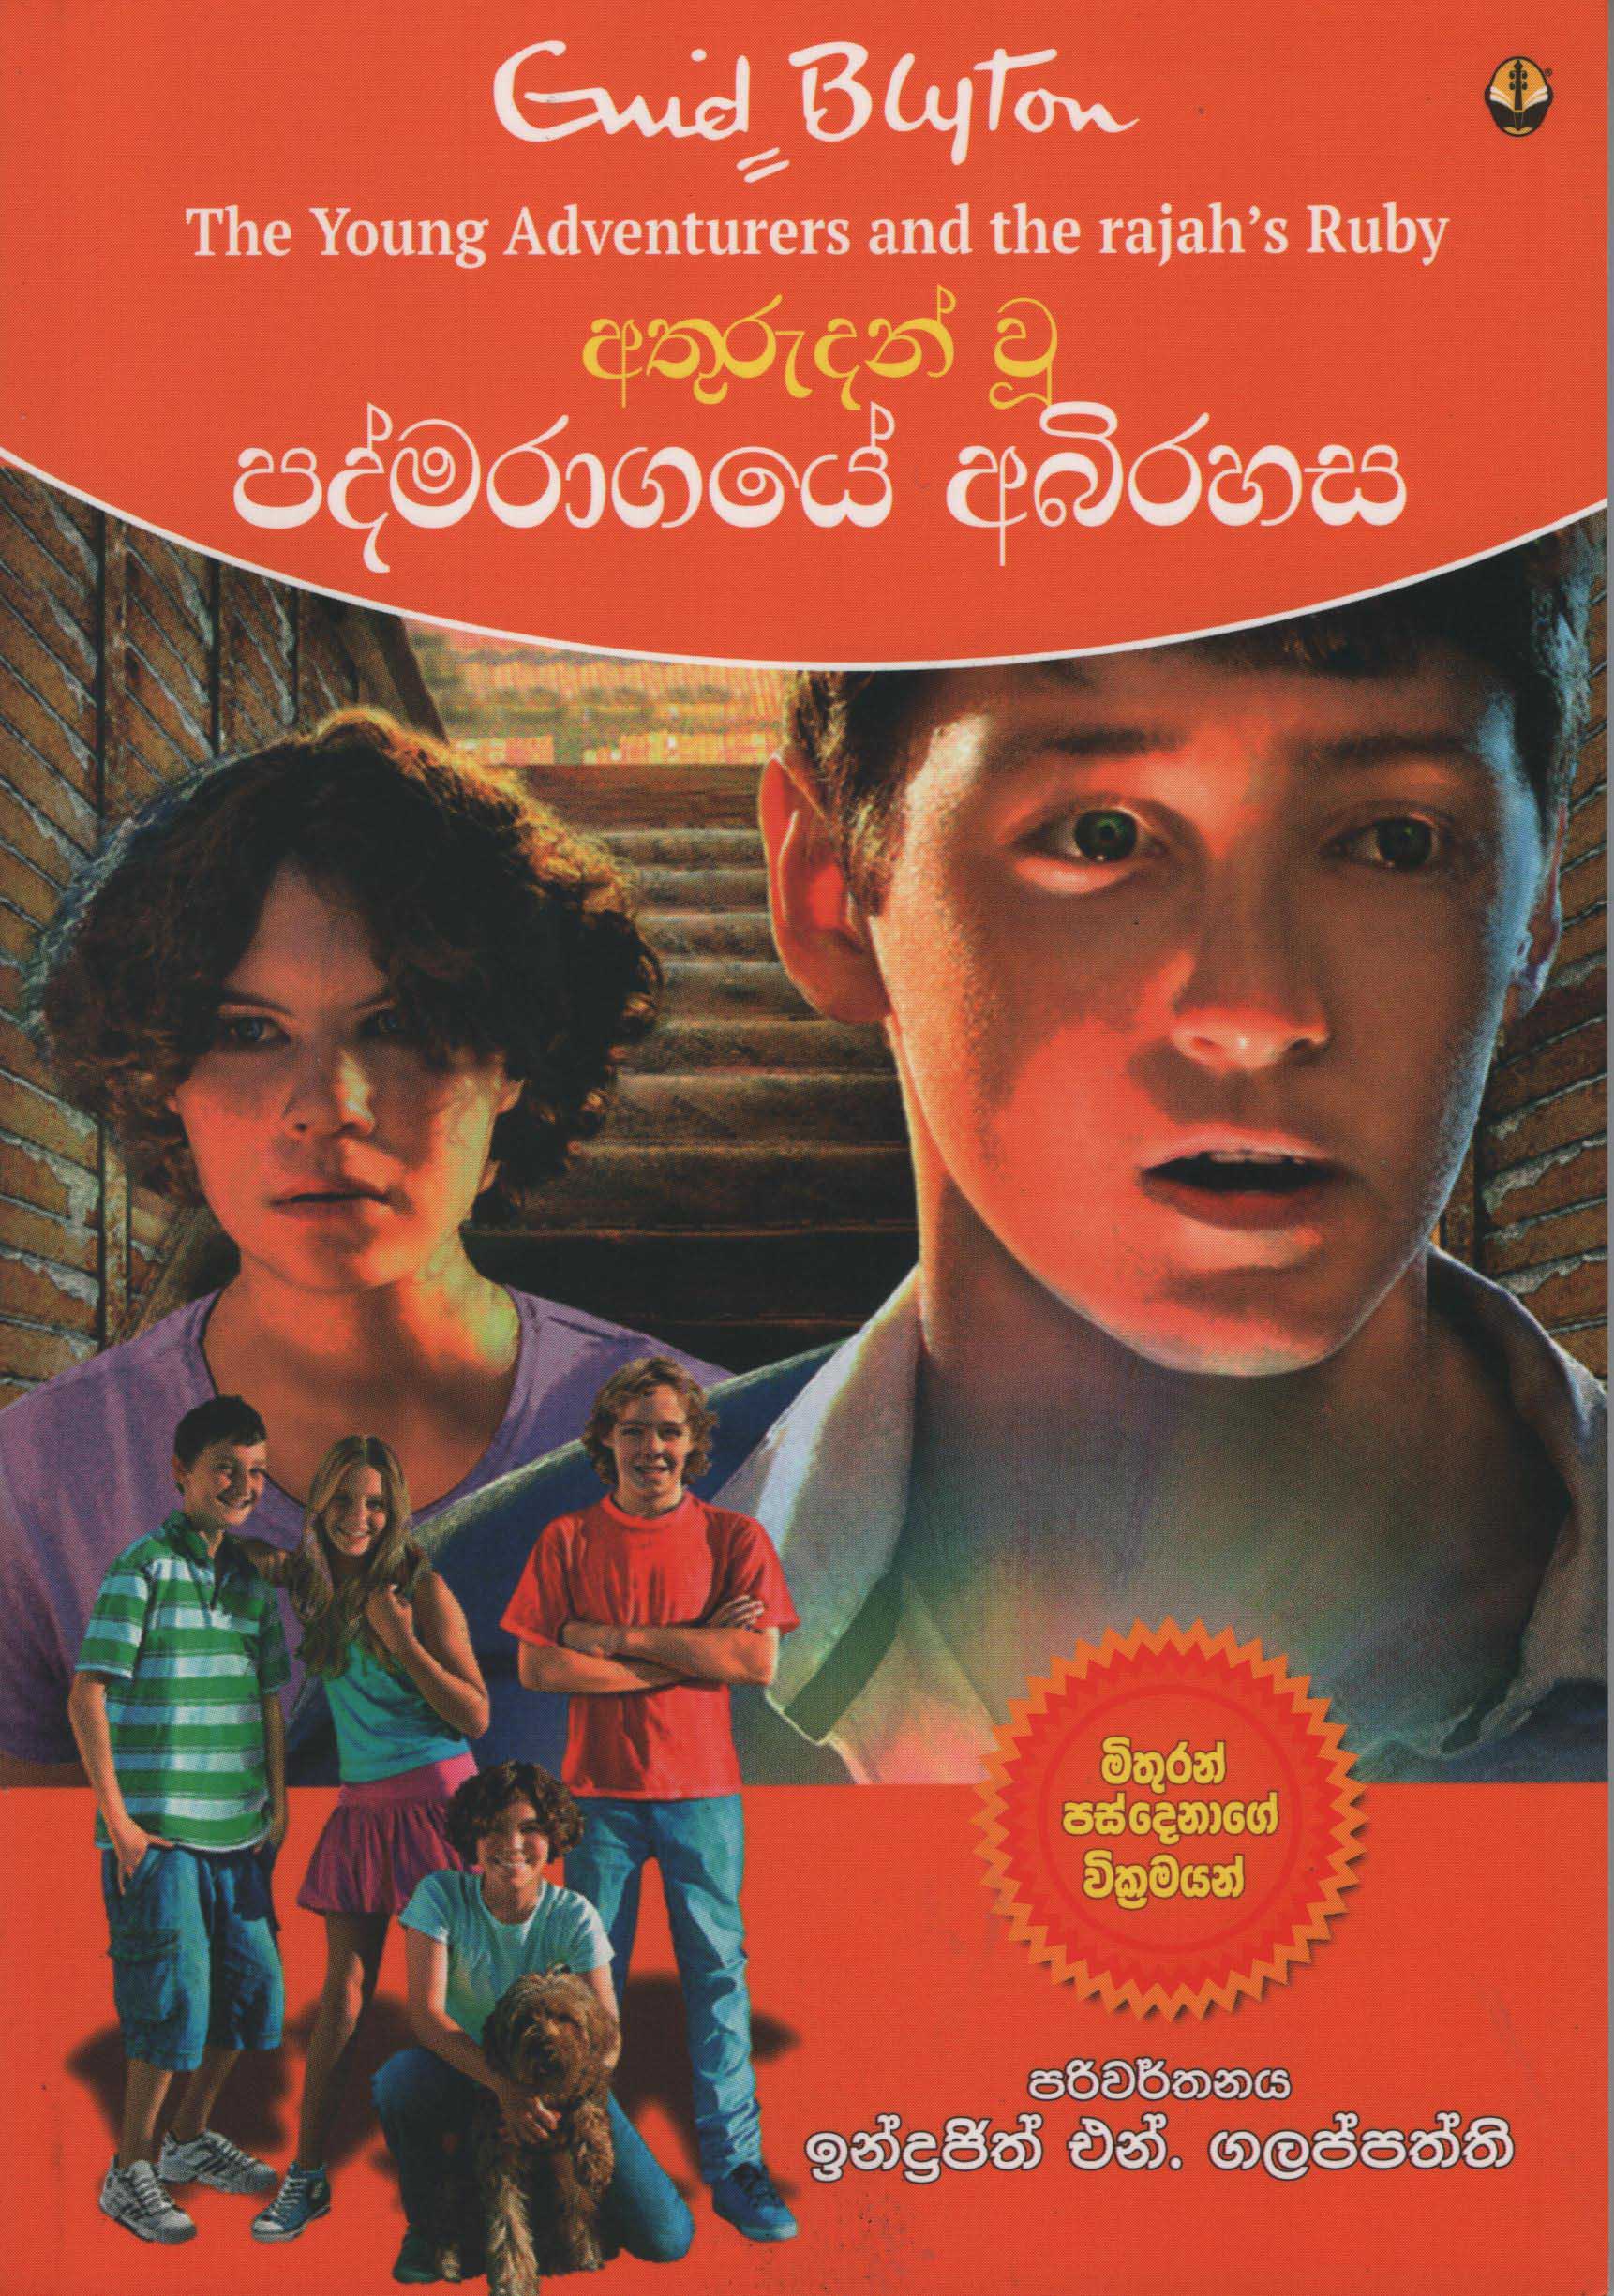 Athurudahan U Padmaragaye Abirahasa Translation of The Young Adventurers and The Rajah's Ruby By Enid Blyton